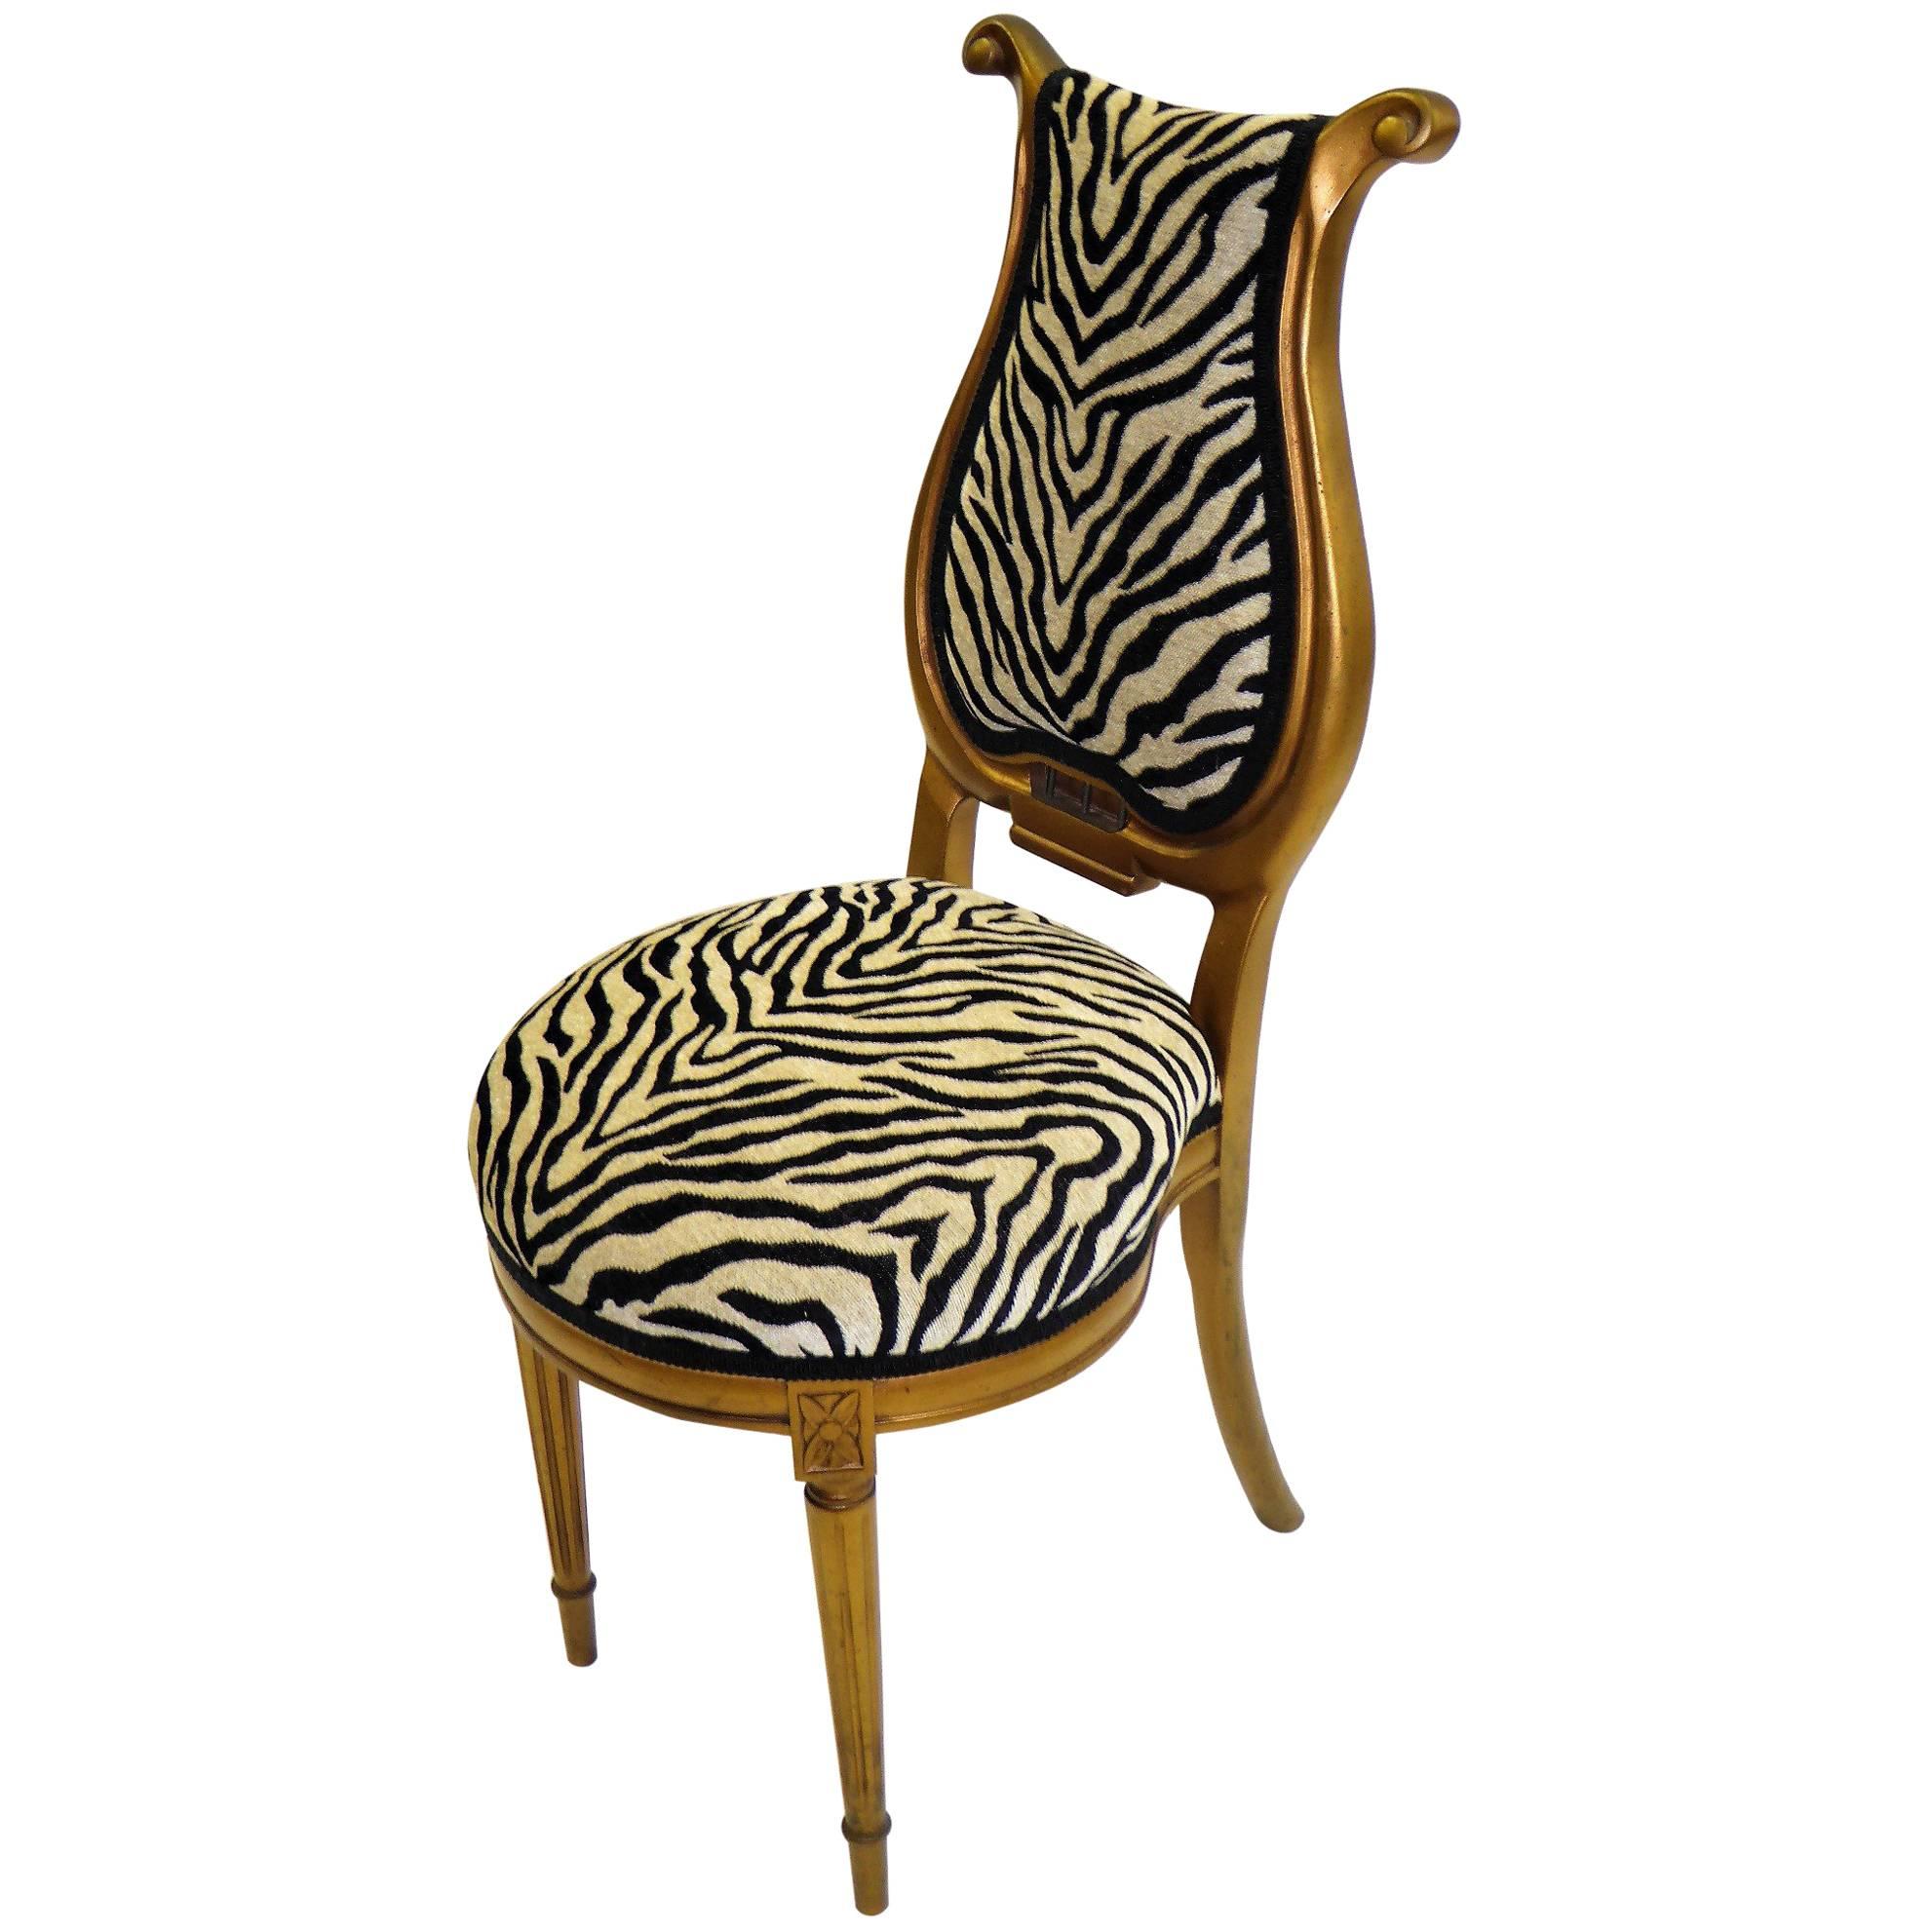 1940s Musical Motif Carved Giltwood Side Chair in Zebra Chenille